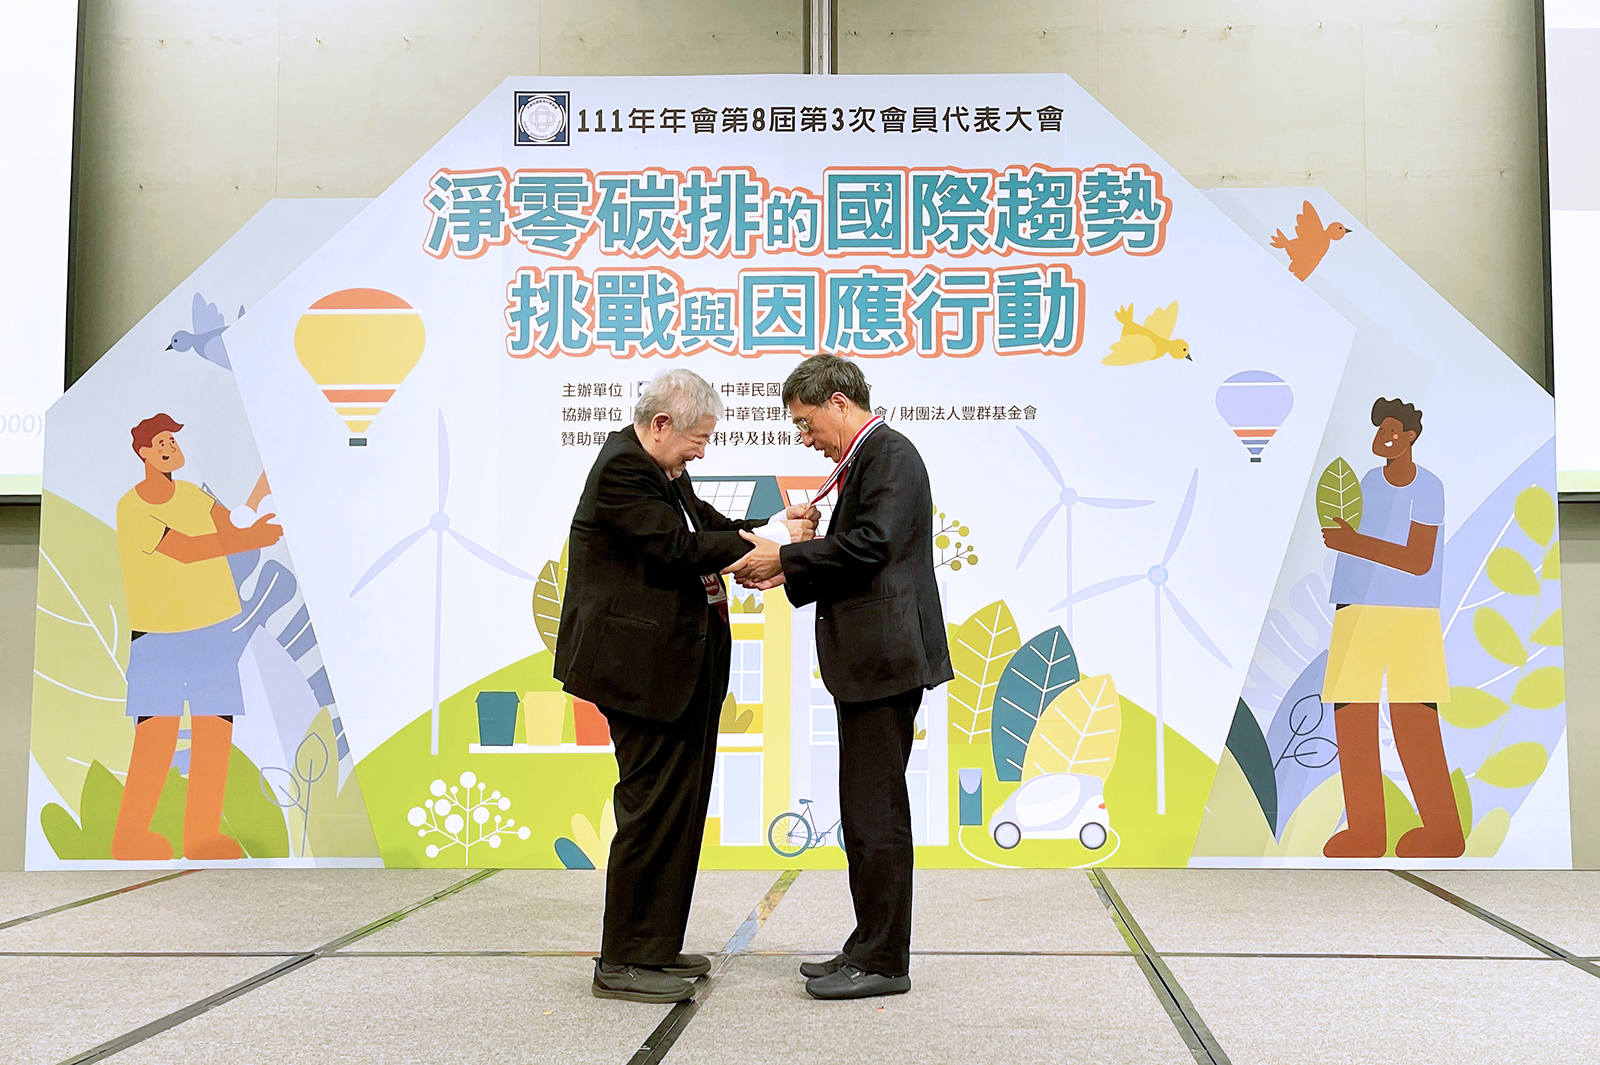 Professor Paul Hsu S. C., Honorary Chairman of the Chinese Management Association, presents the prestigious medal in Management to Professor Way Kuo, President of CityU.